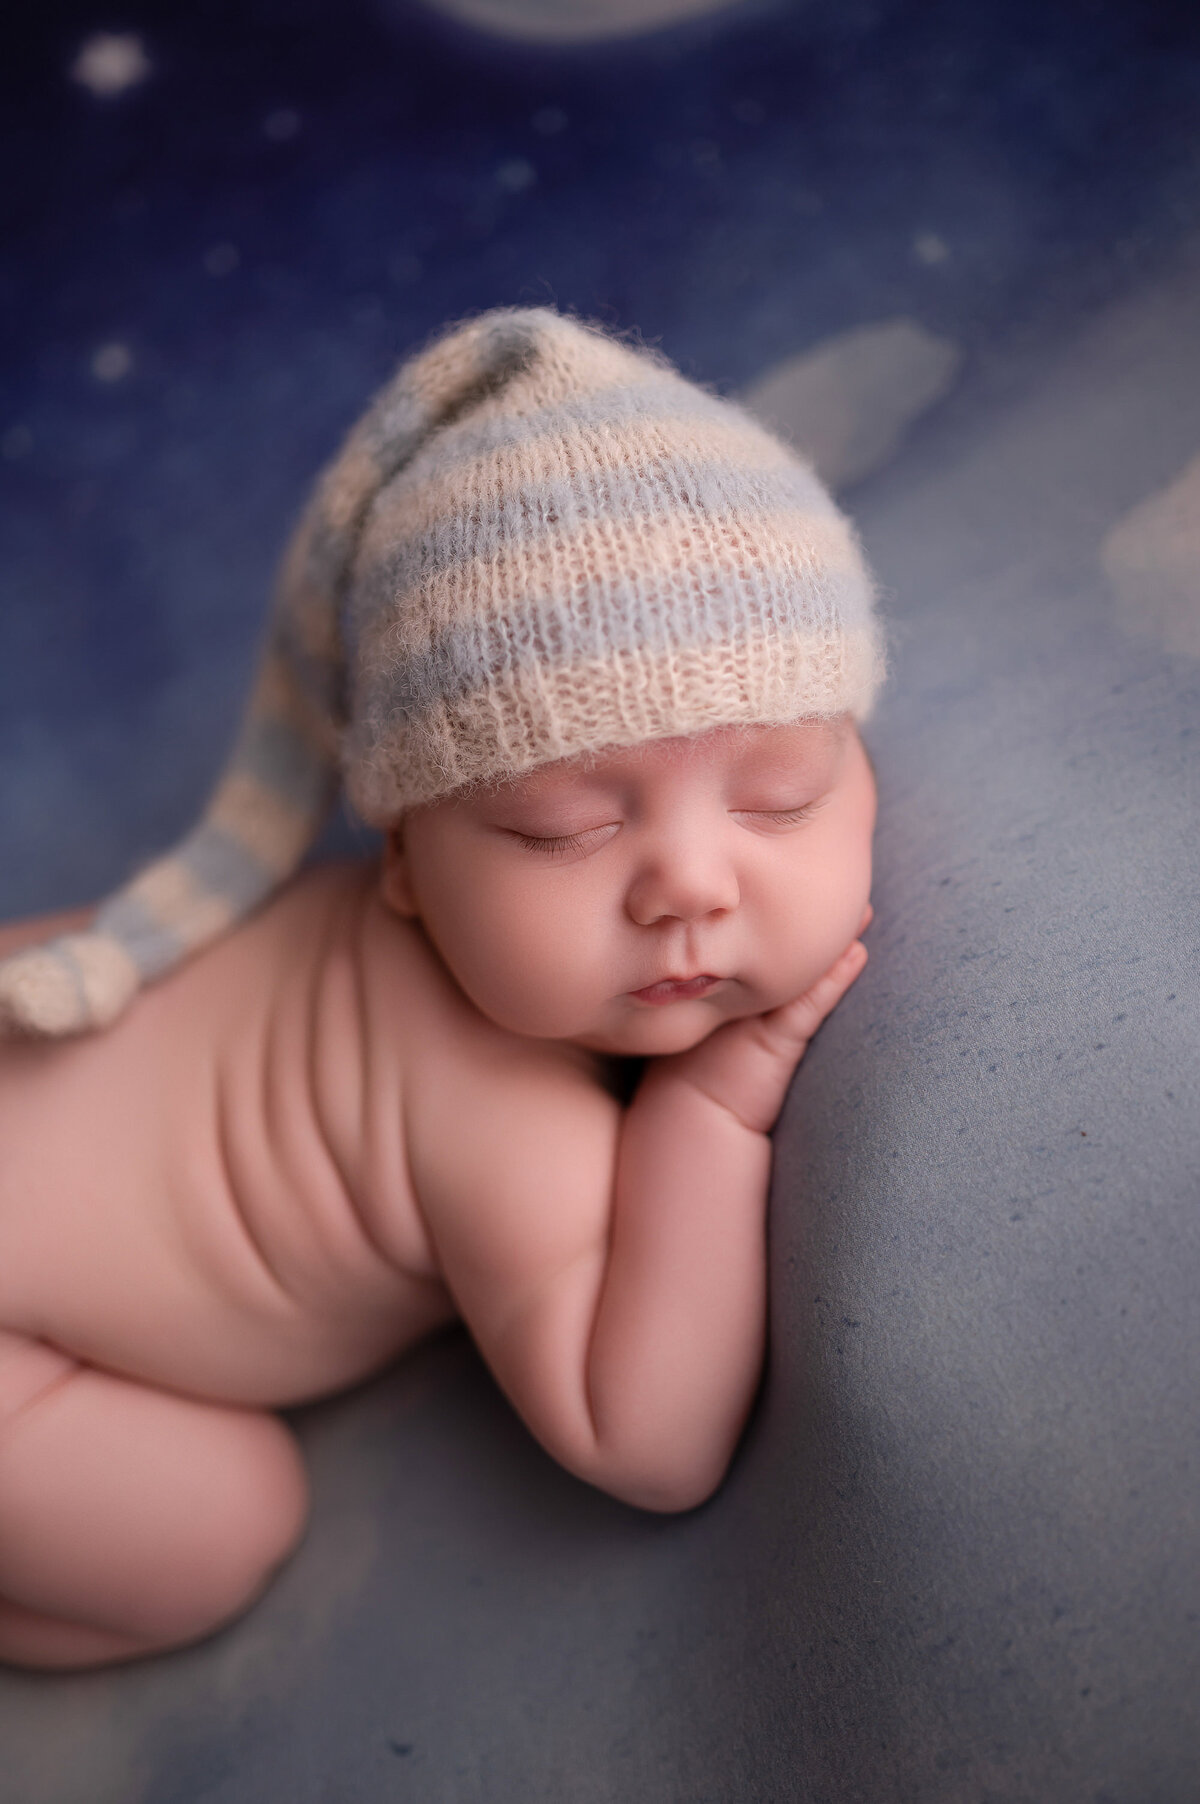 Portrait of a sleeping newborn baby wearing a striped stocking cap on a blue backdrop.